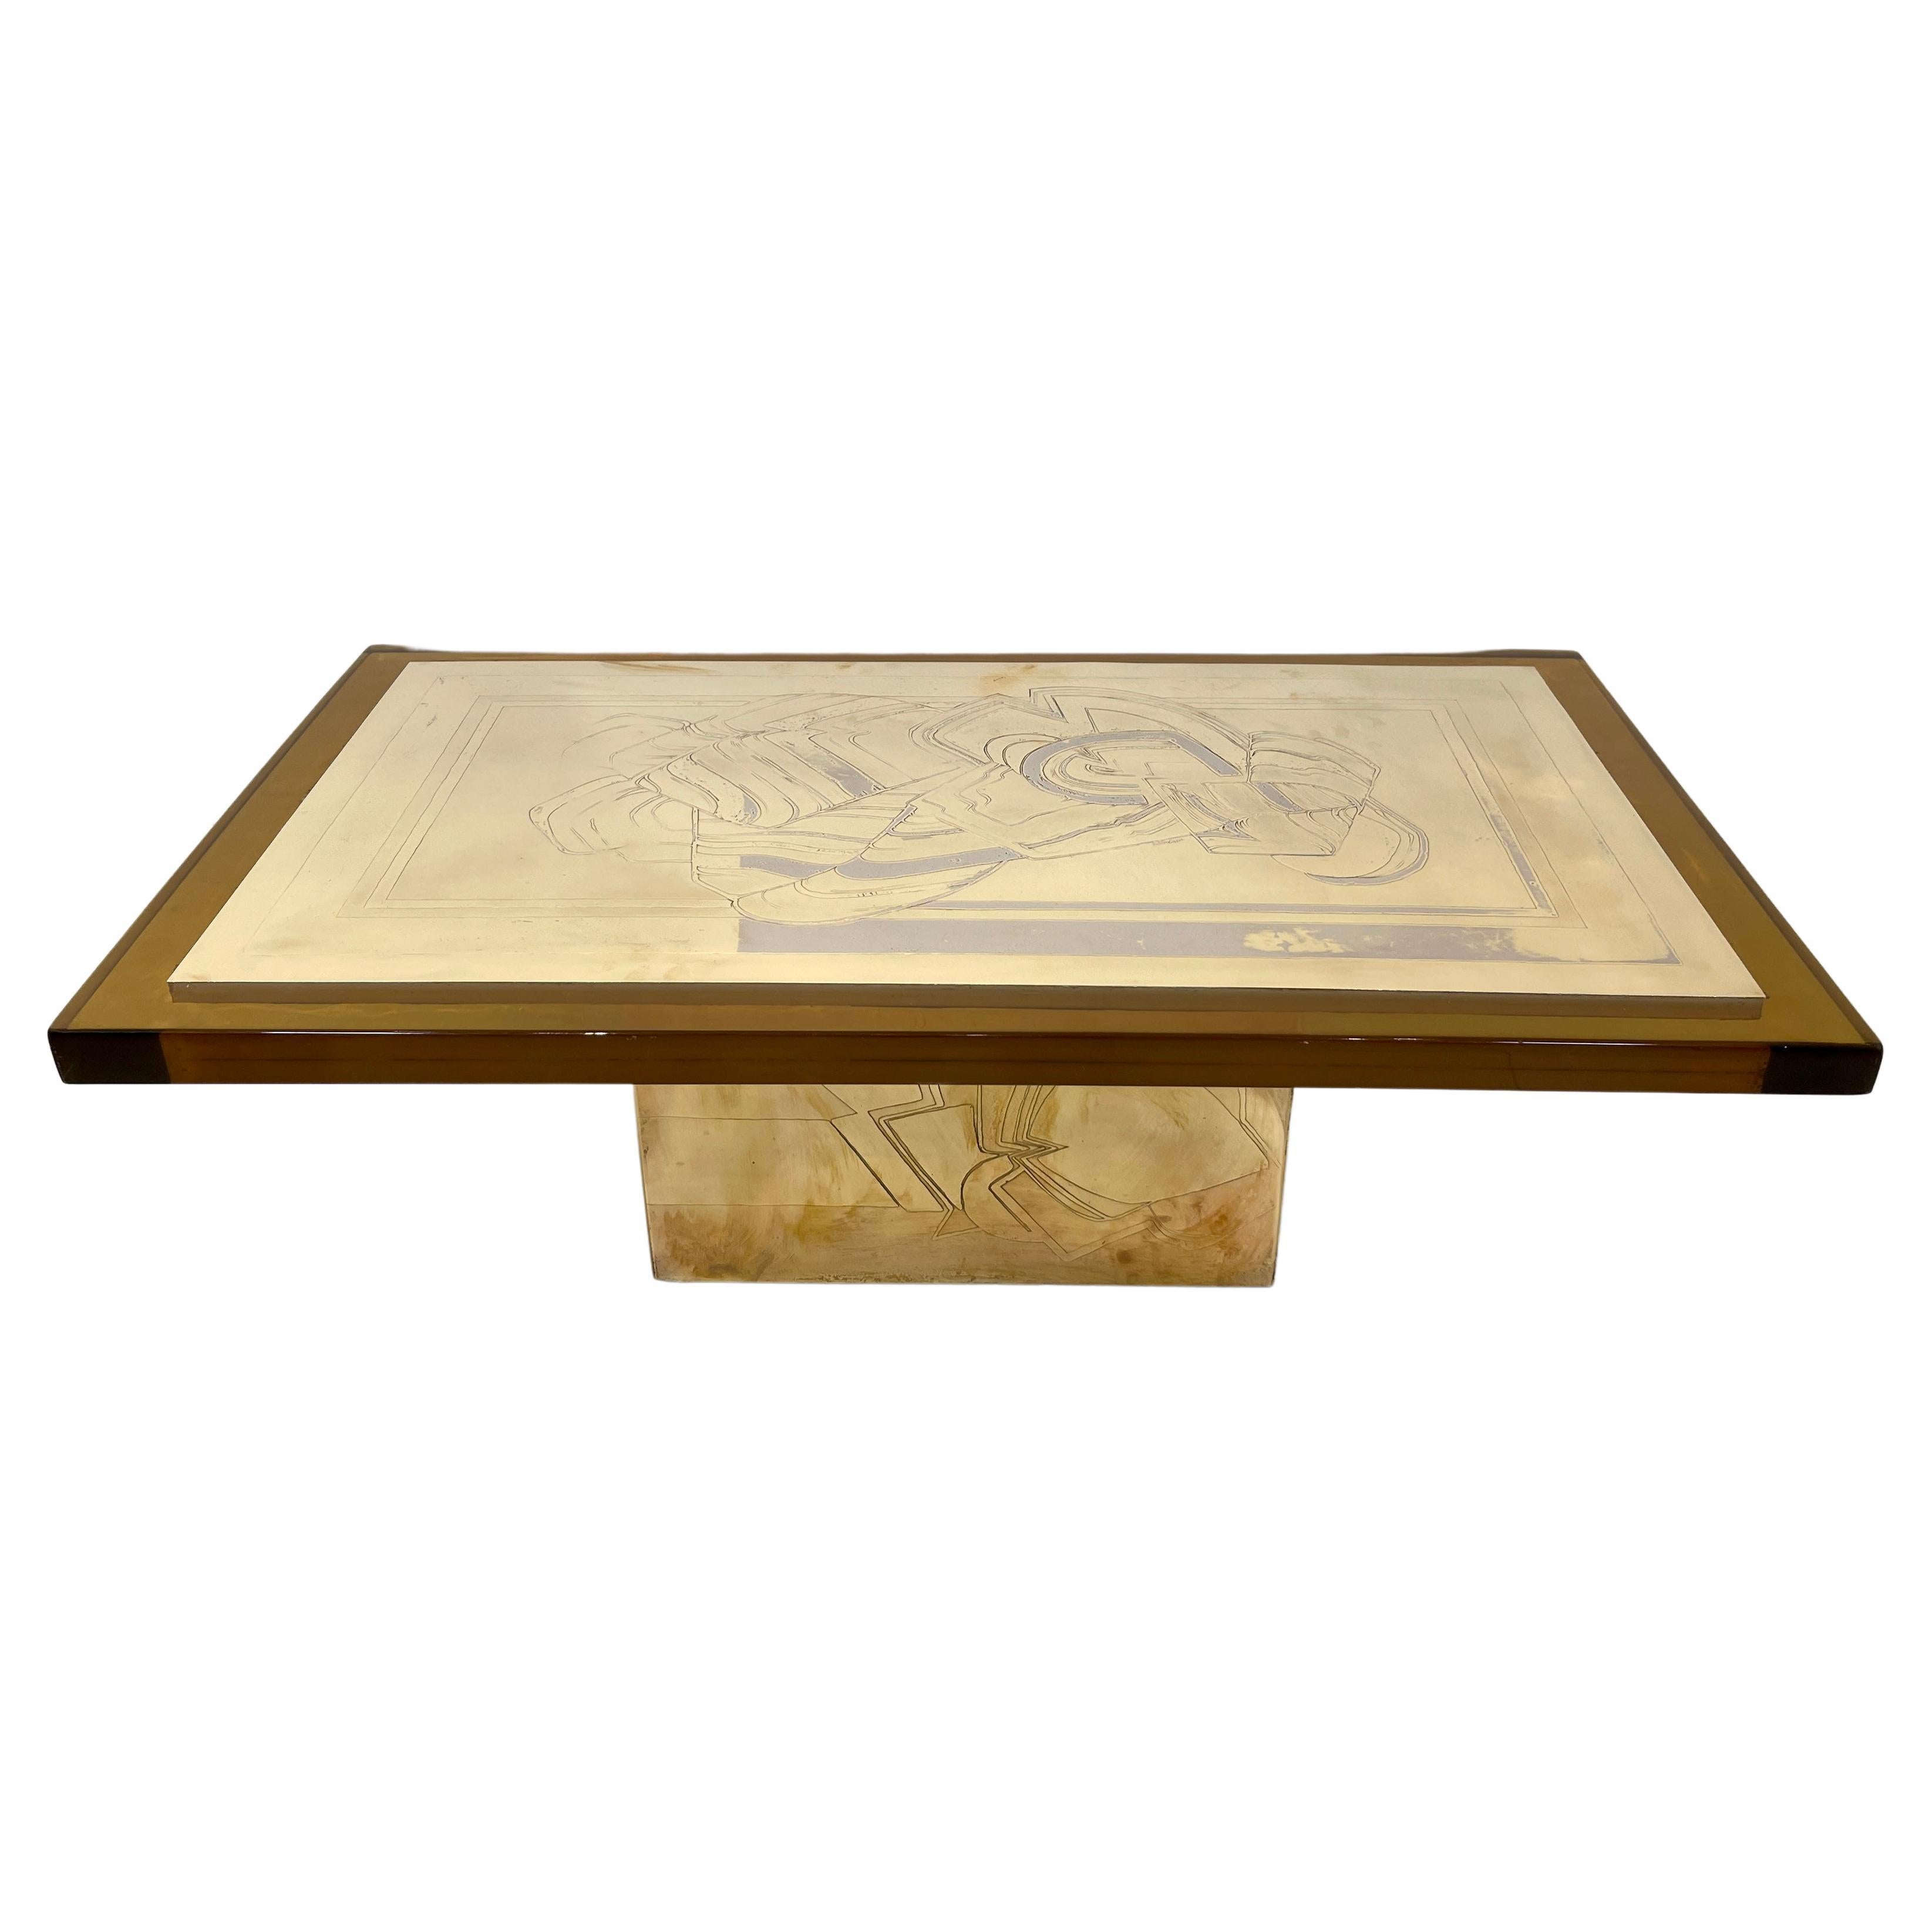 Etched brass and resin Coffee table By Armand Jonckers